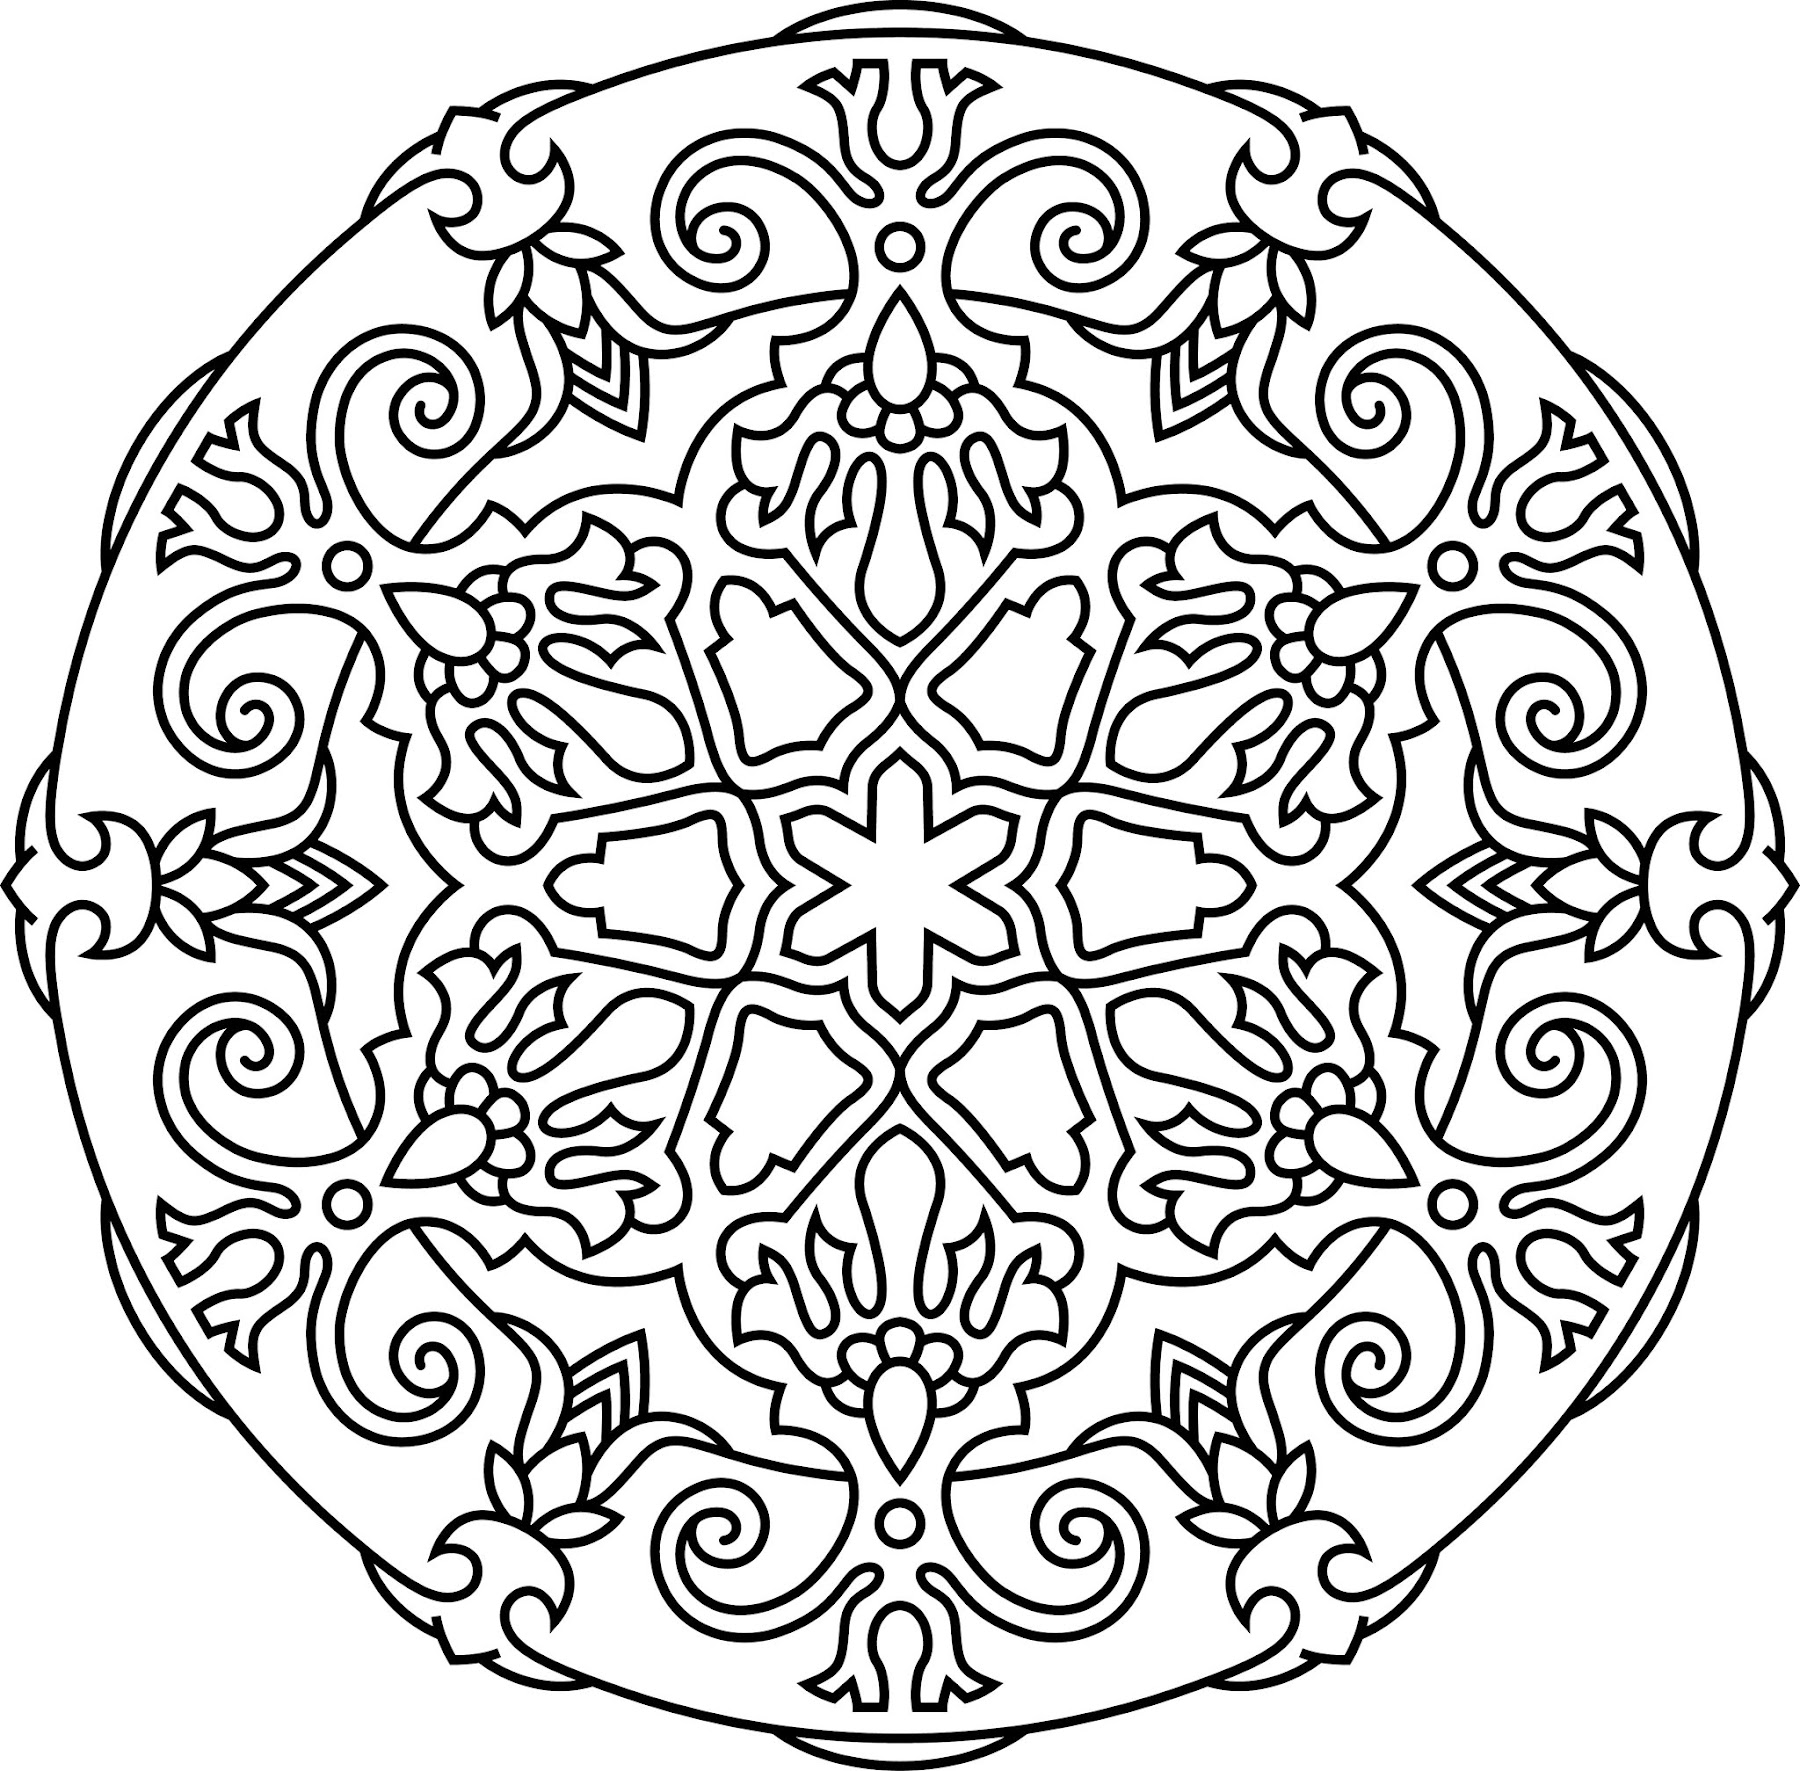 Download Download 50+ Mandala Art Svg Free File for Cricut, Silhouette and Other Machine